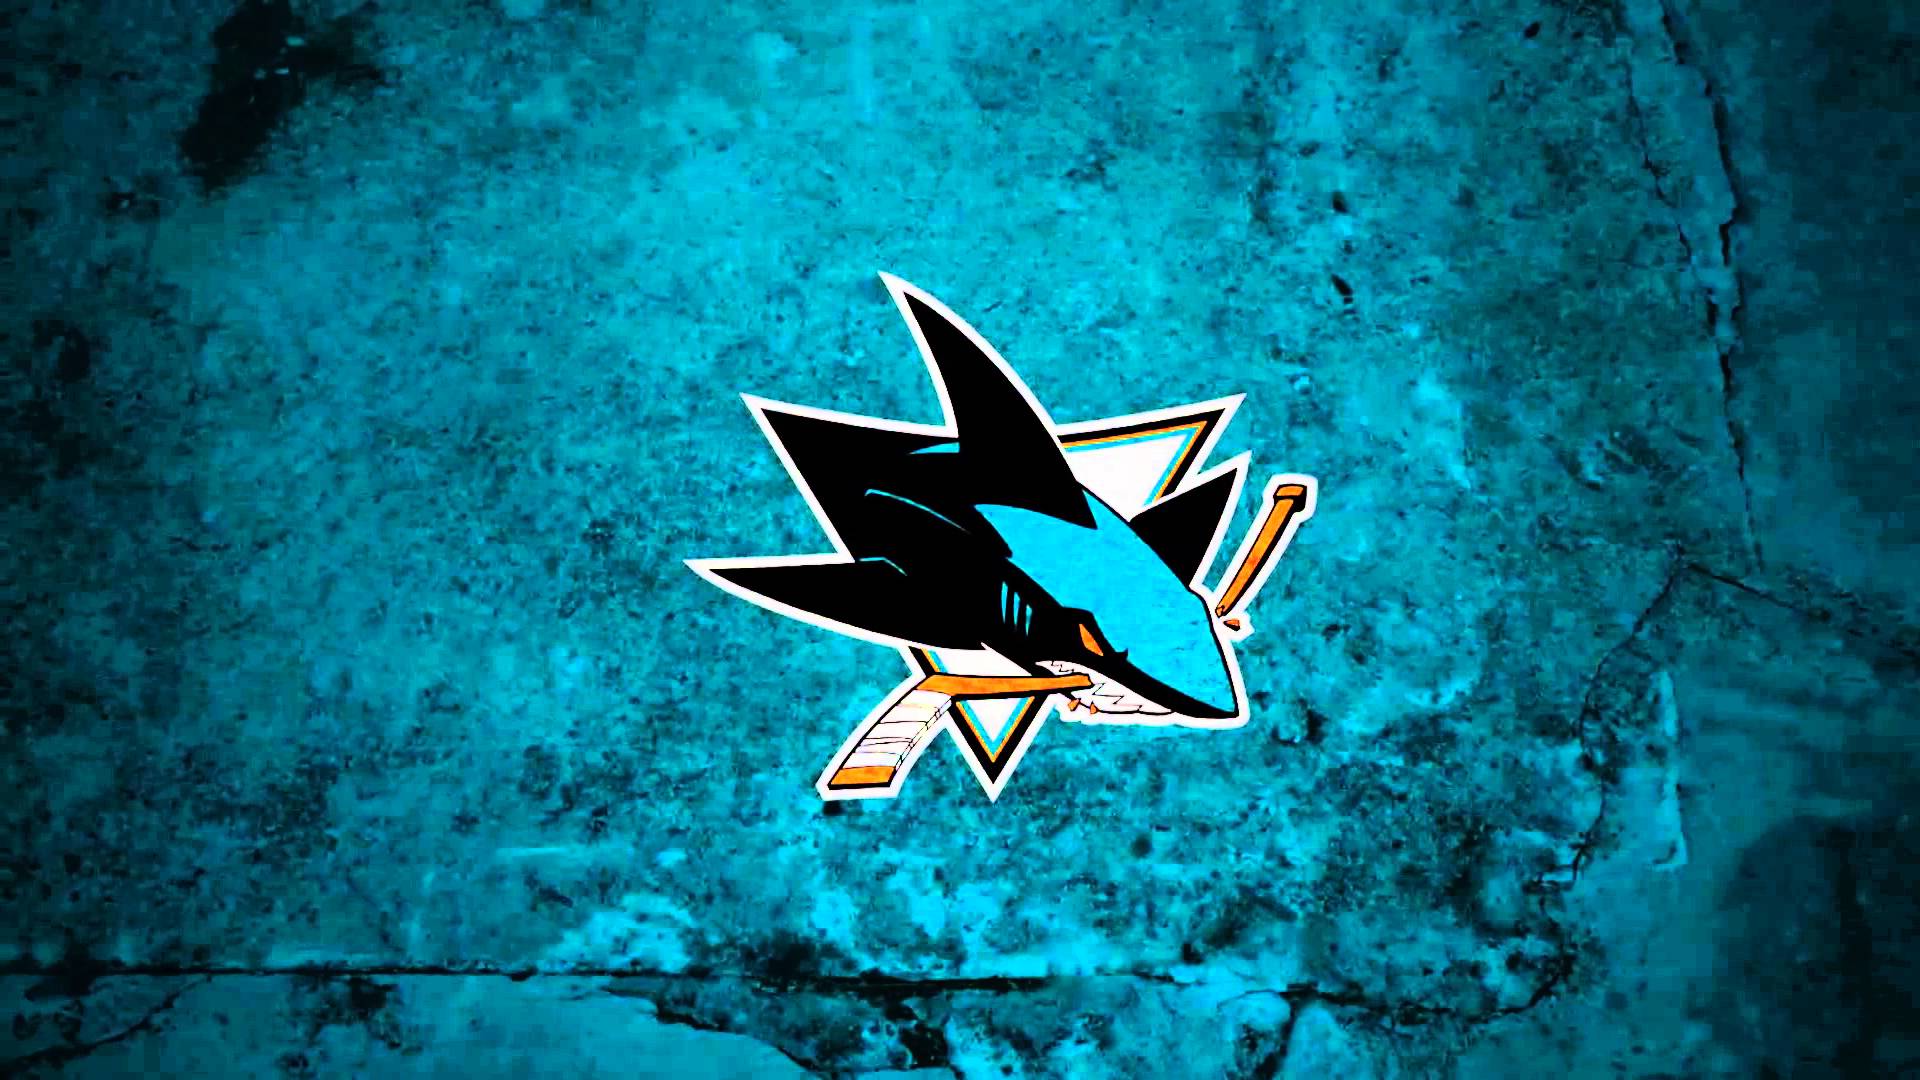 San Jose Sharks Vector Logo Isolated on Blue-green Teel Background.NHL.  Editorial Photo - Illustration of arena, brand: 142868846